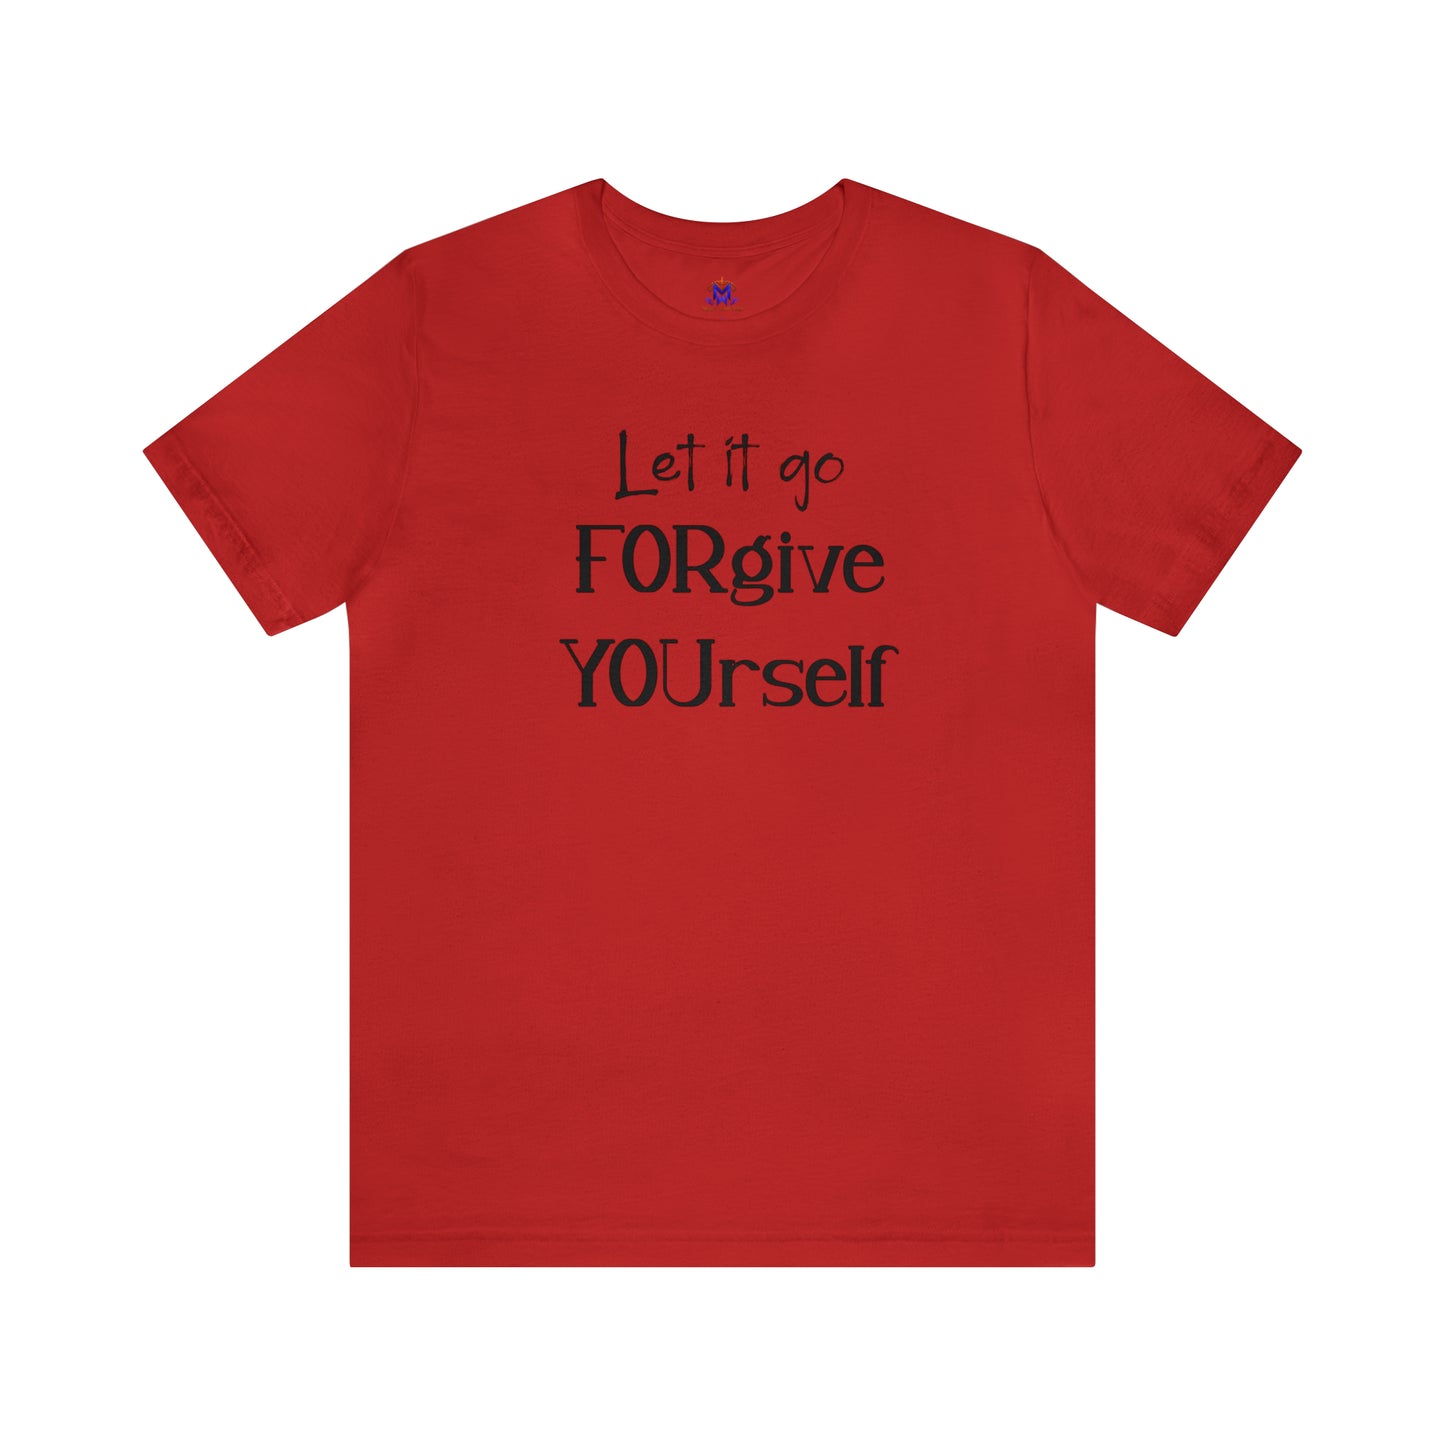 FORgive YOUrself-(Available in more colors)